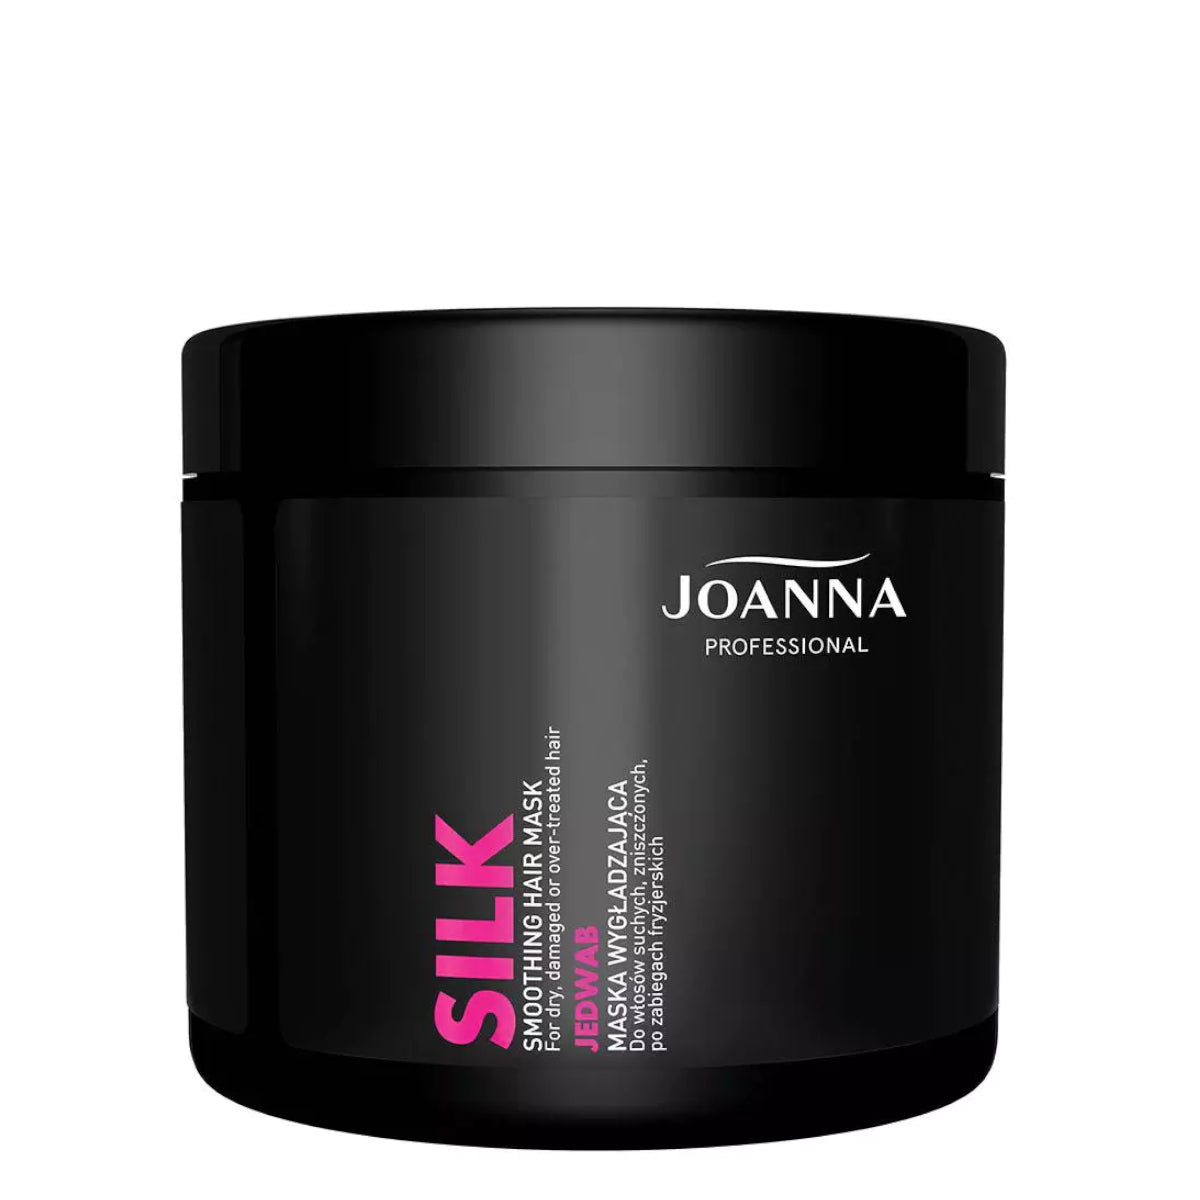 Joanna Professional Silk Smoothing Hair Care Bundle for Dry & Damaged Hair Mask - Roxie Cosmetics